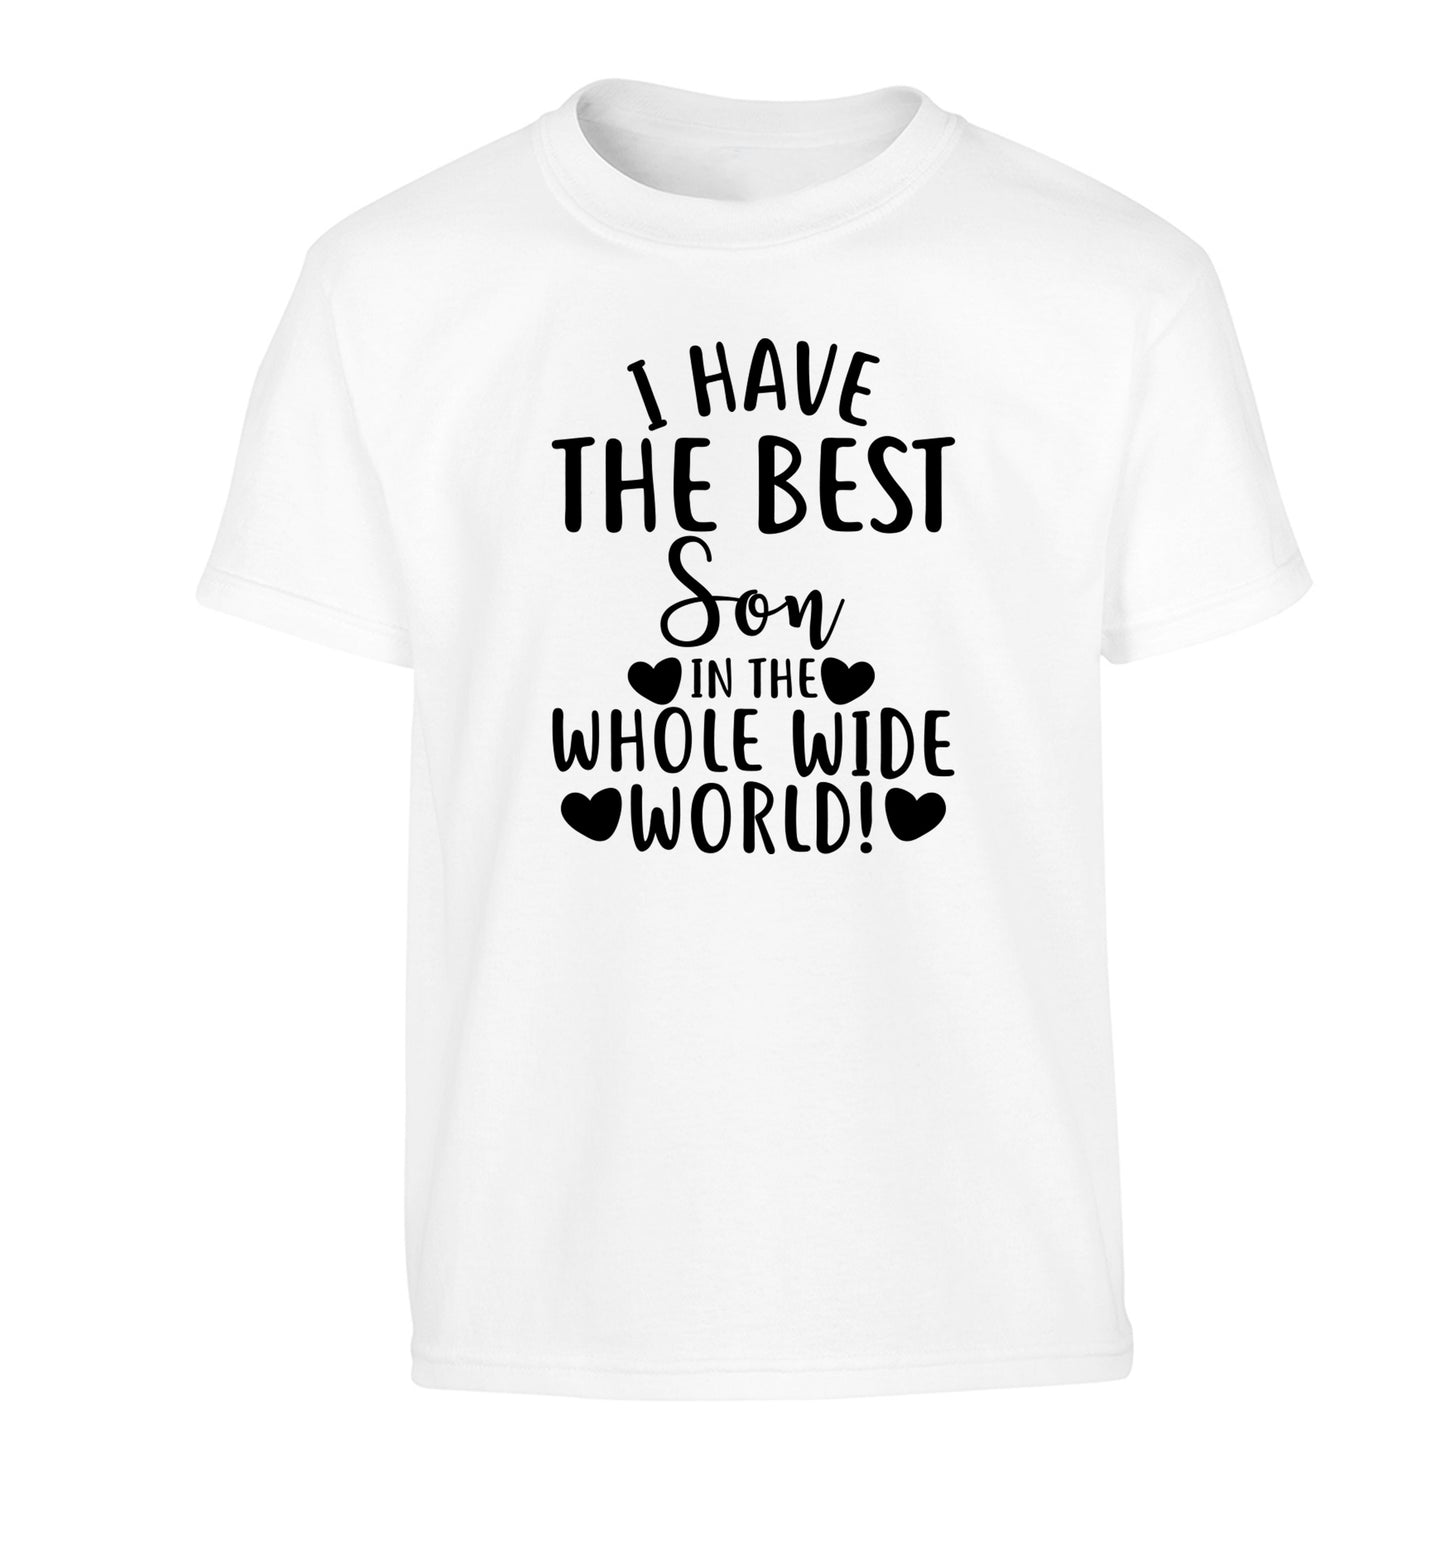 I have the best son in the whole wide world! Children's white Tshirt 12-13 Years